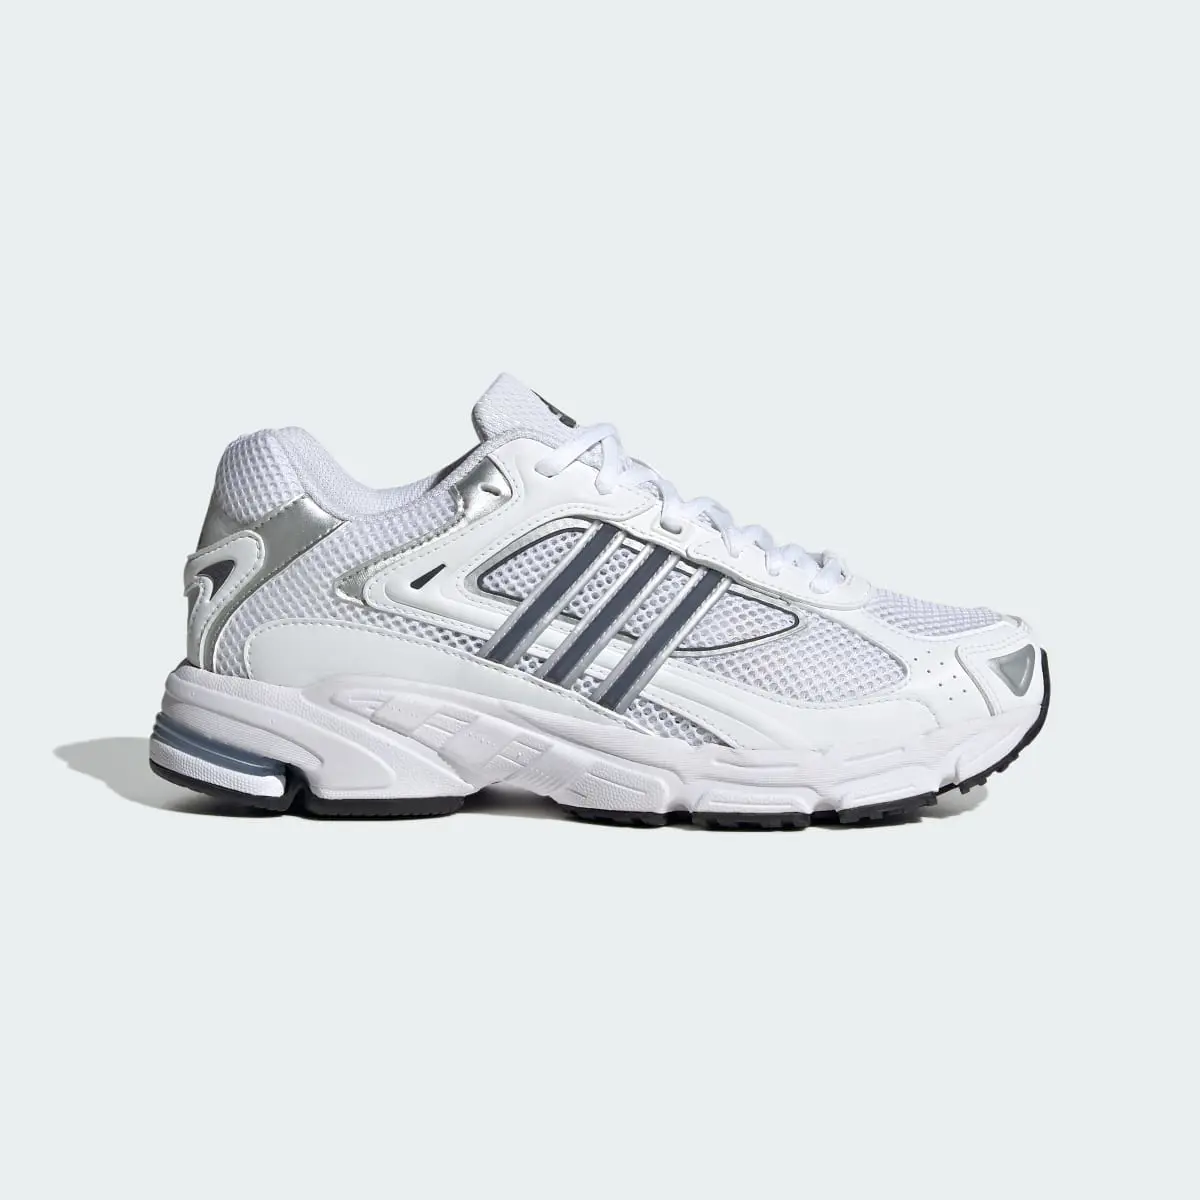 Adidas Response CL Shoes. 2